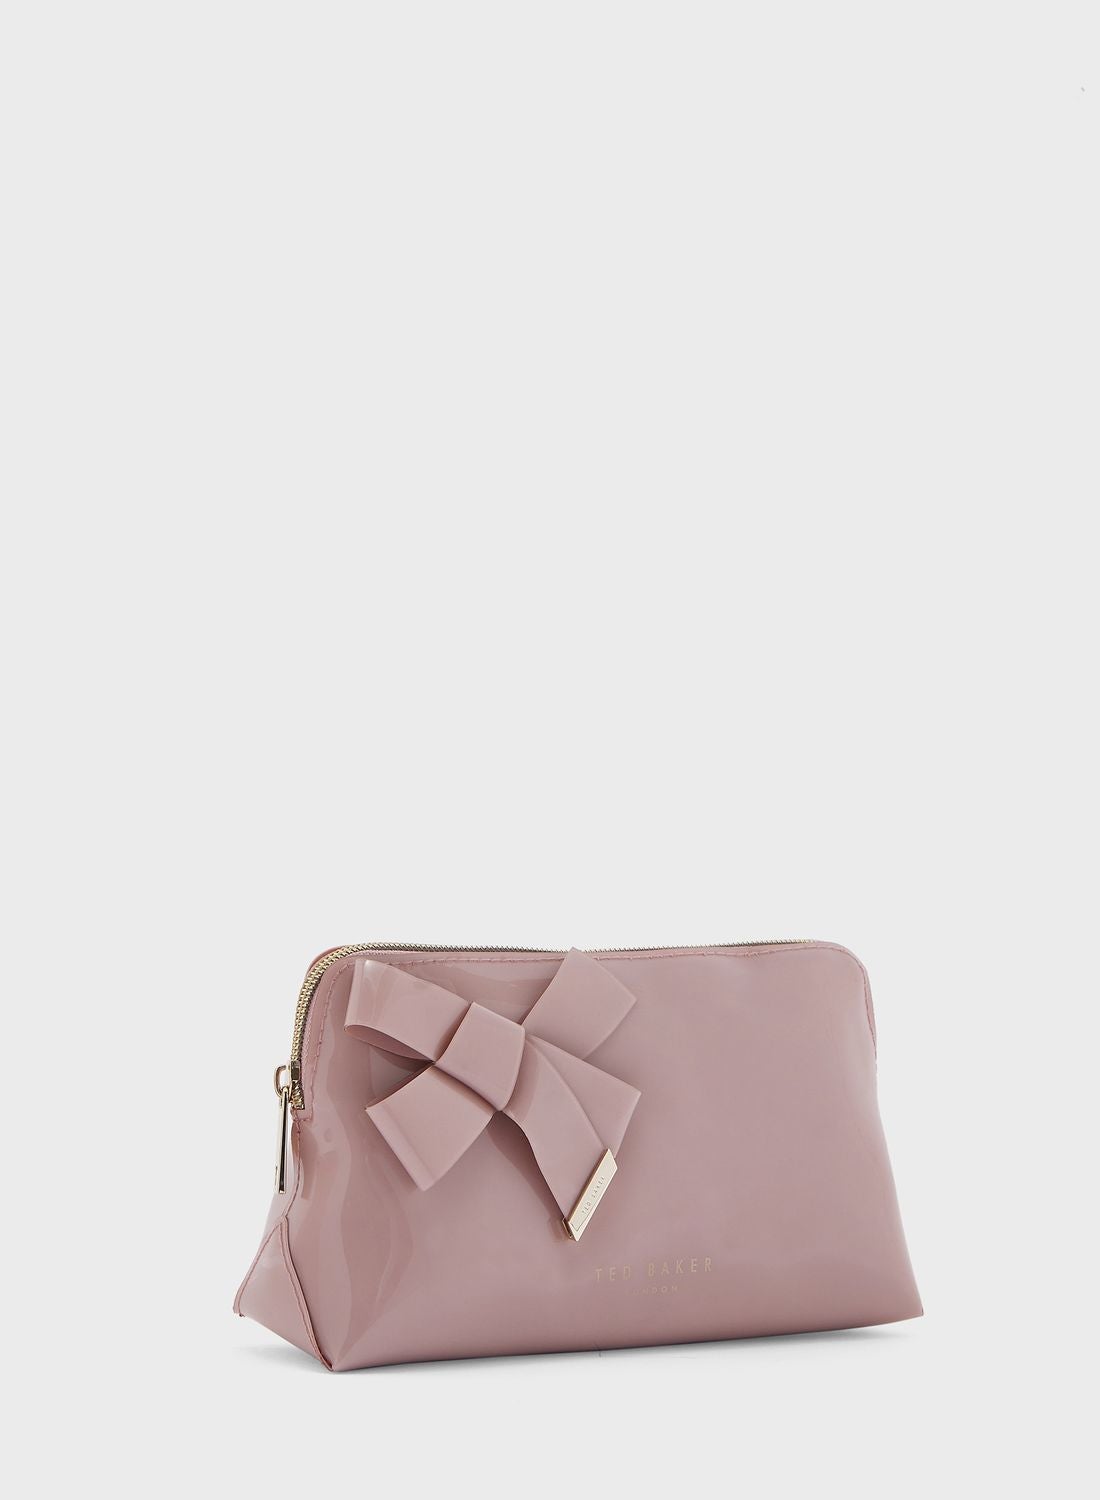 Ted Baker Pink Bow Bags & Handbags for Women for sale